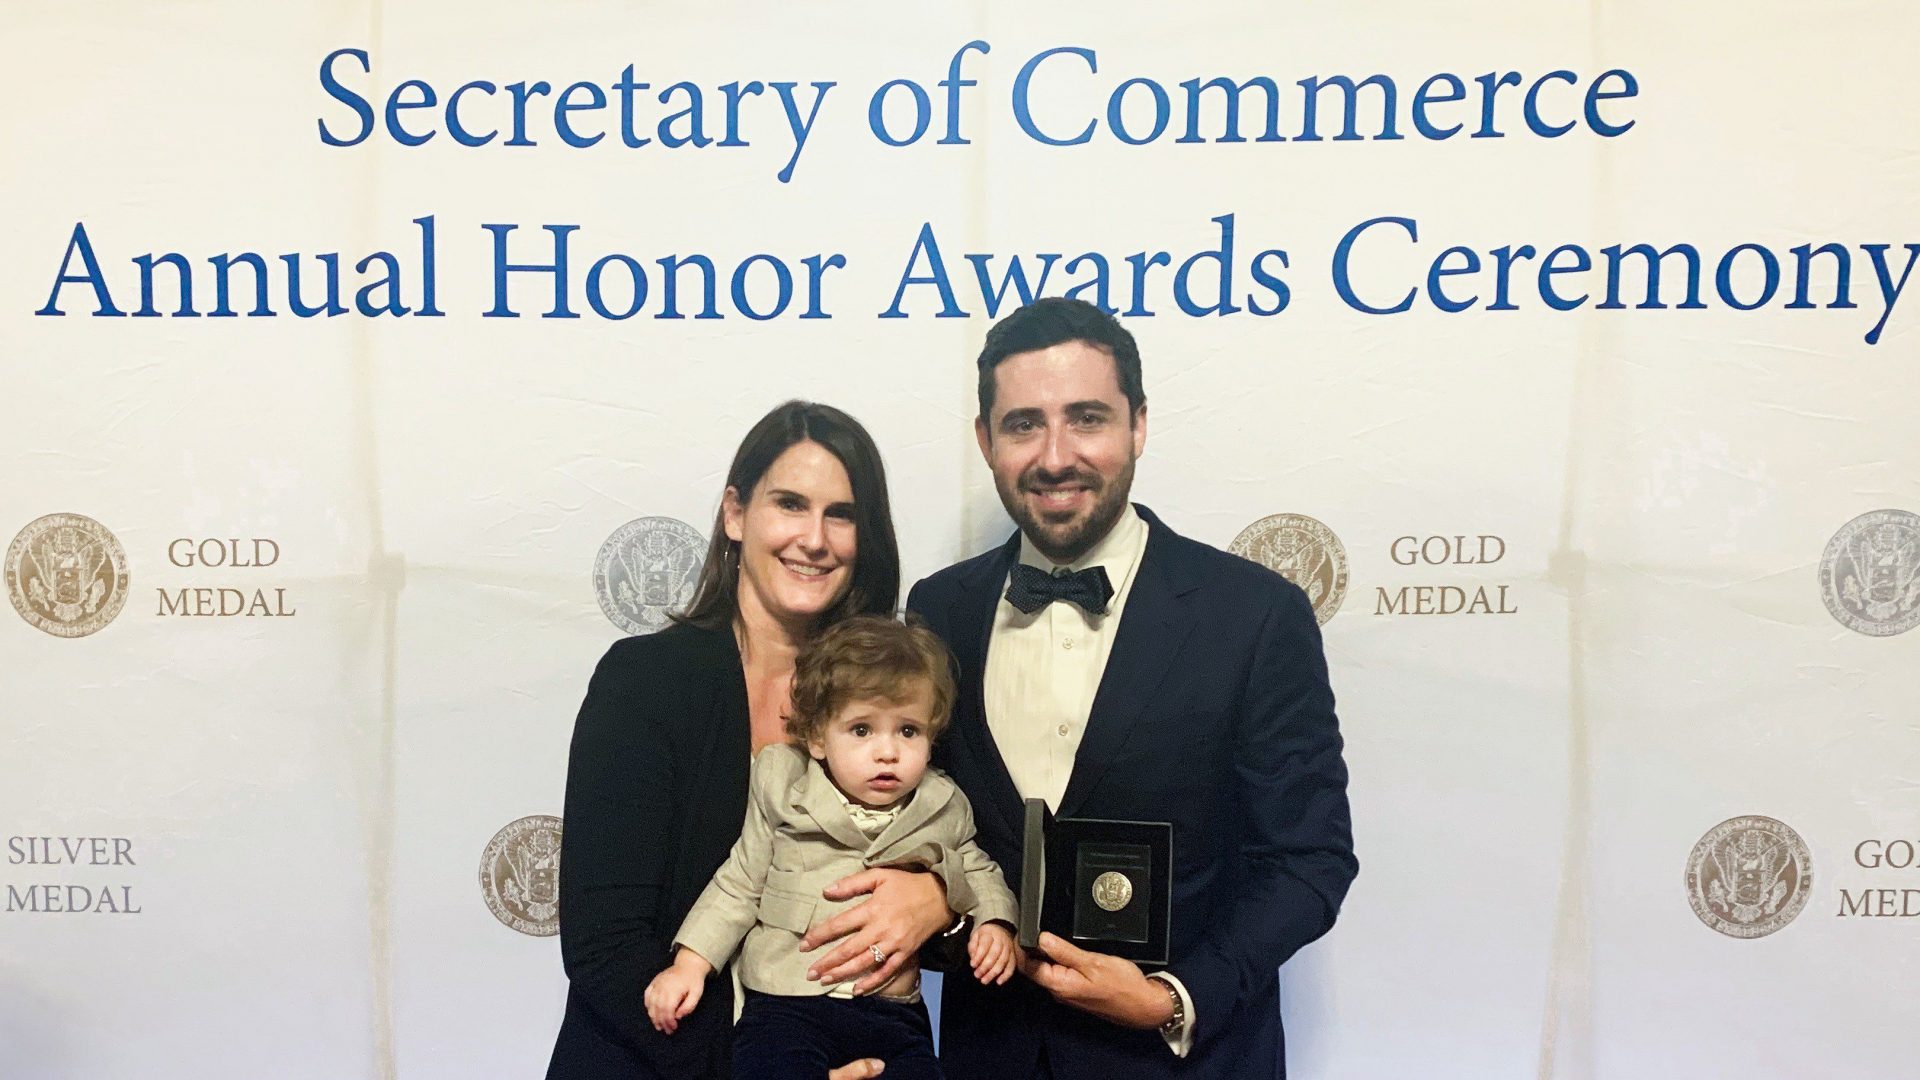 Ian Enochs, pictured with his wife and son, awarded with the DOC Silver Medal Award.